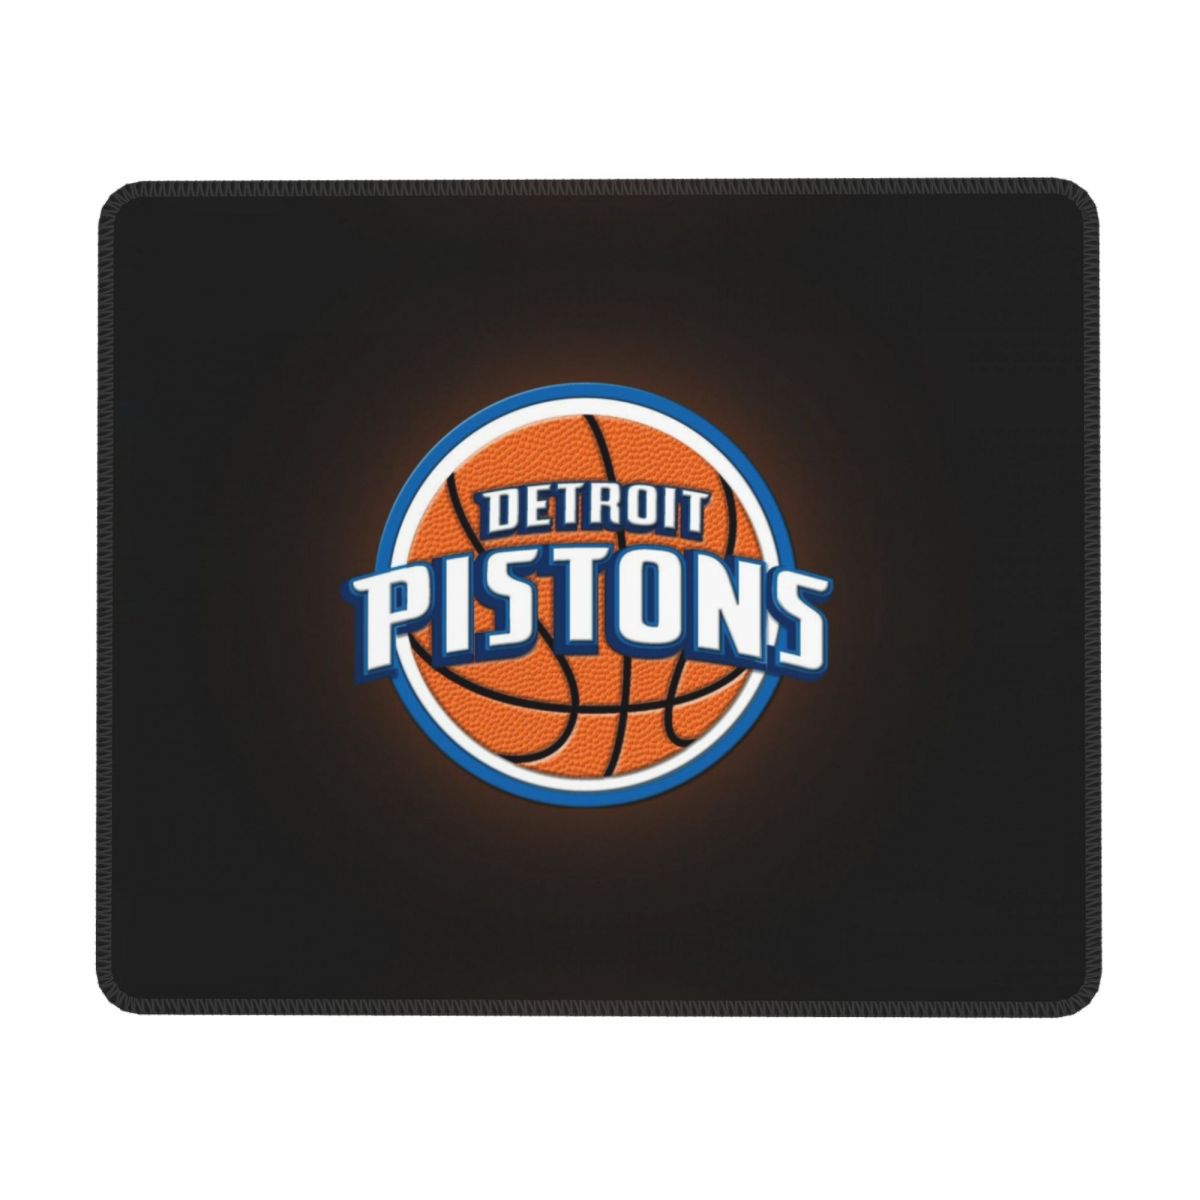 Detroit Pistons Detailed Basketball Illustration Square Mouse Pad for Wireless Mouse